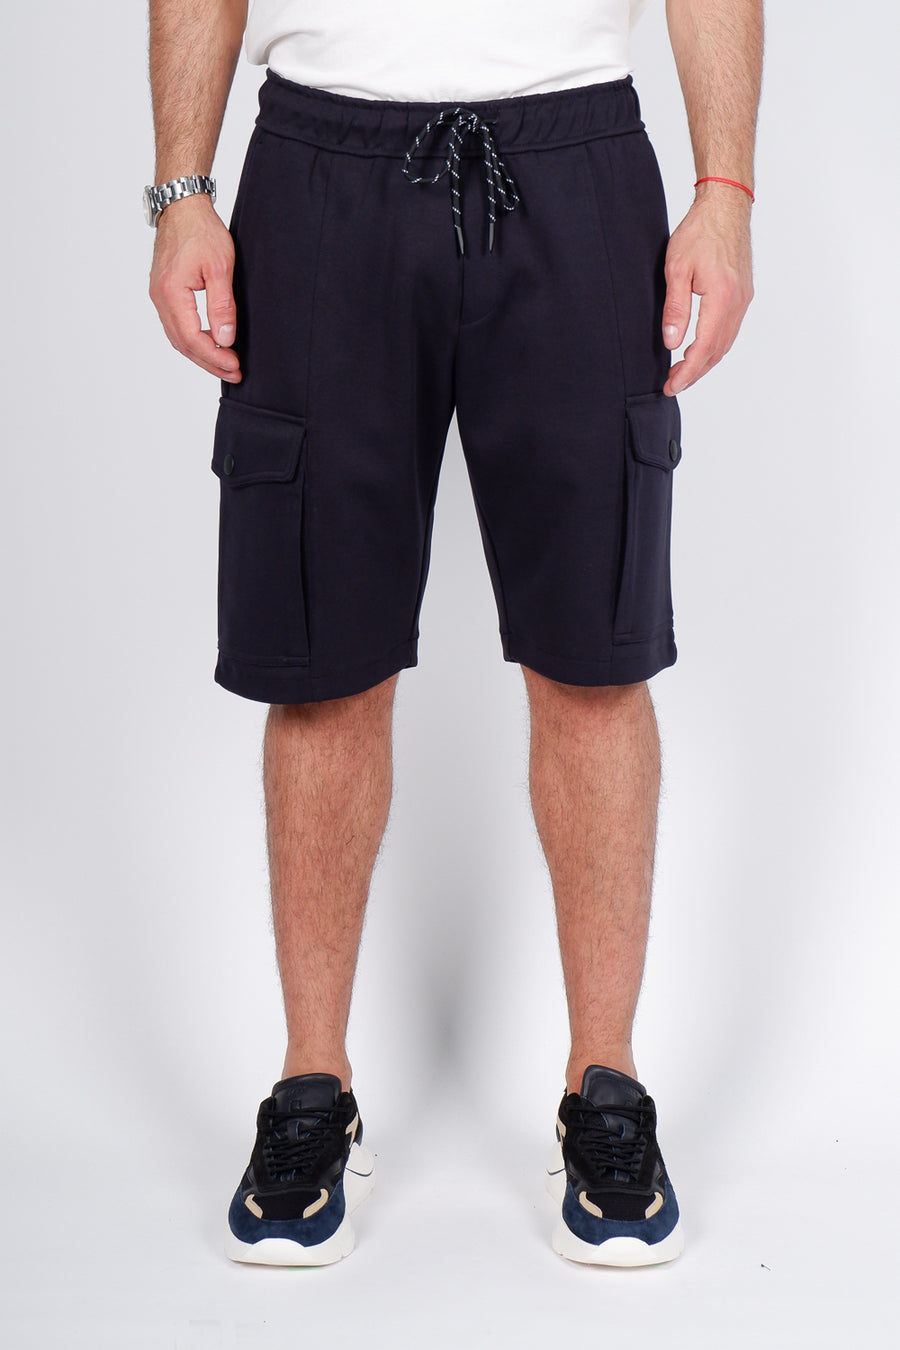 Buy the Antony Morato Fleece Cargo Shorts Blue at Intro. Spend £50 for free UK delivery. Official stockists. We ship worldwide.